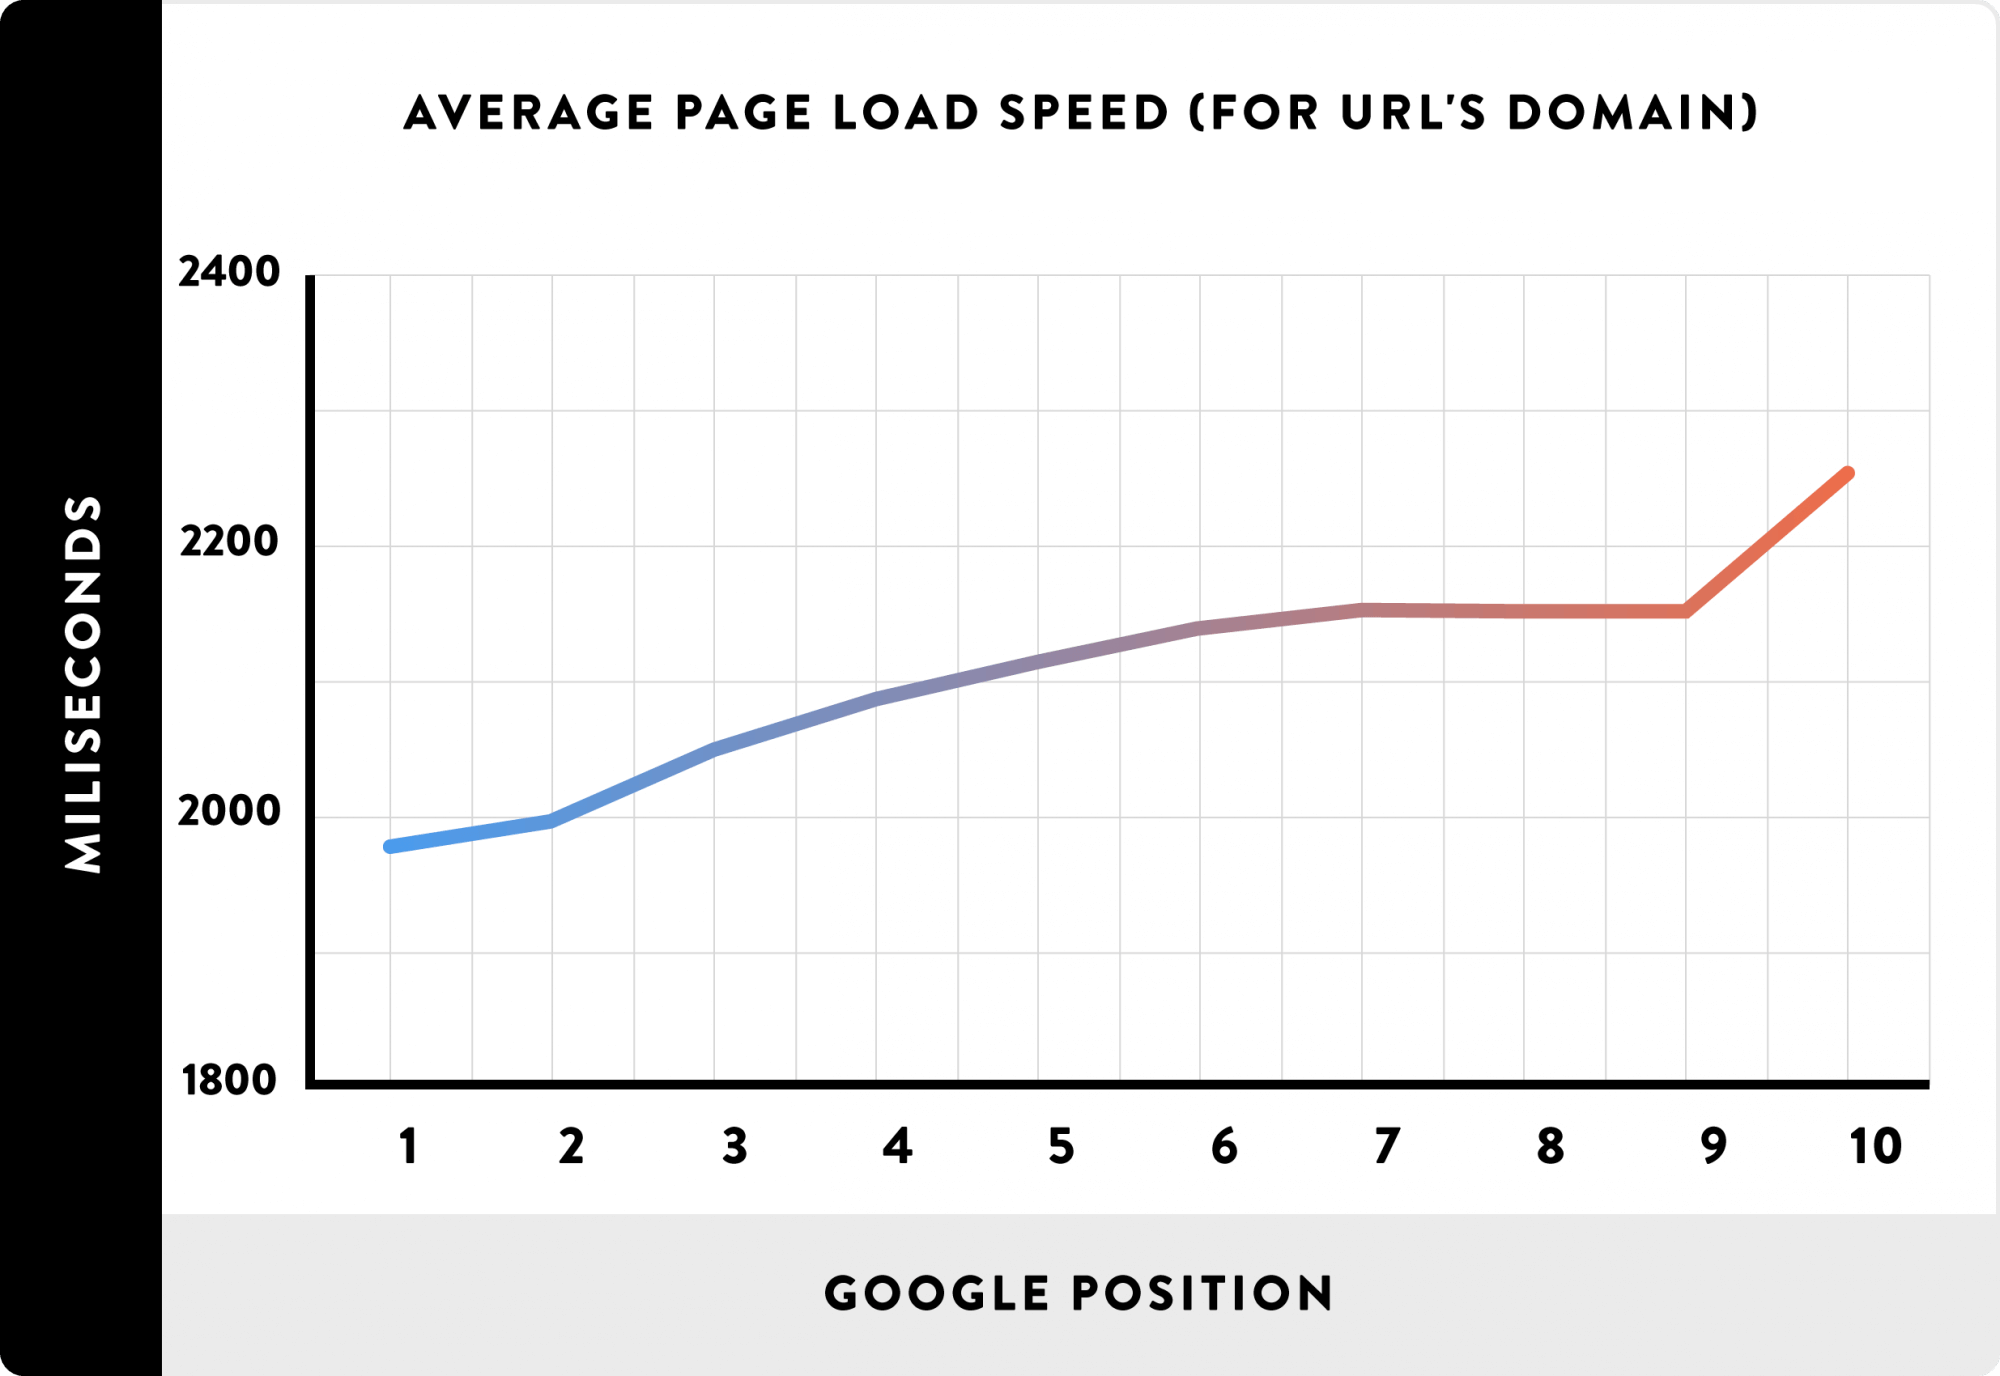 01_Average-Page-Load-Spead-for-URLs-domain_line.png